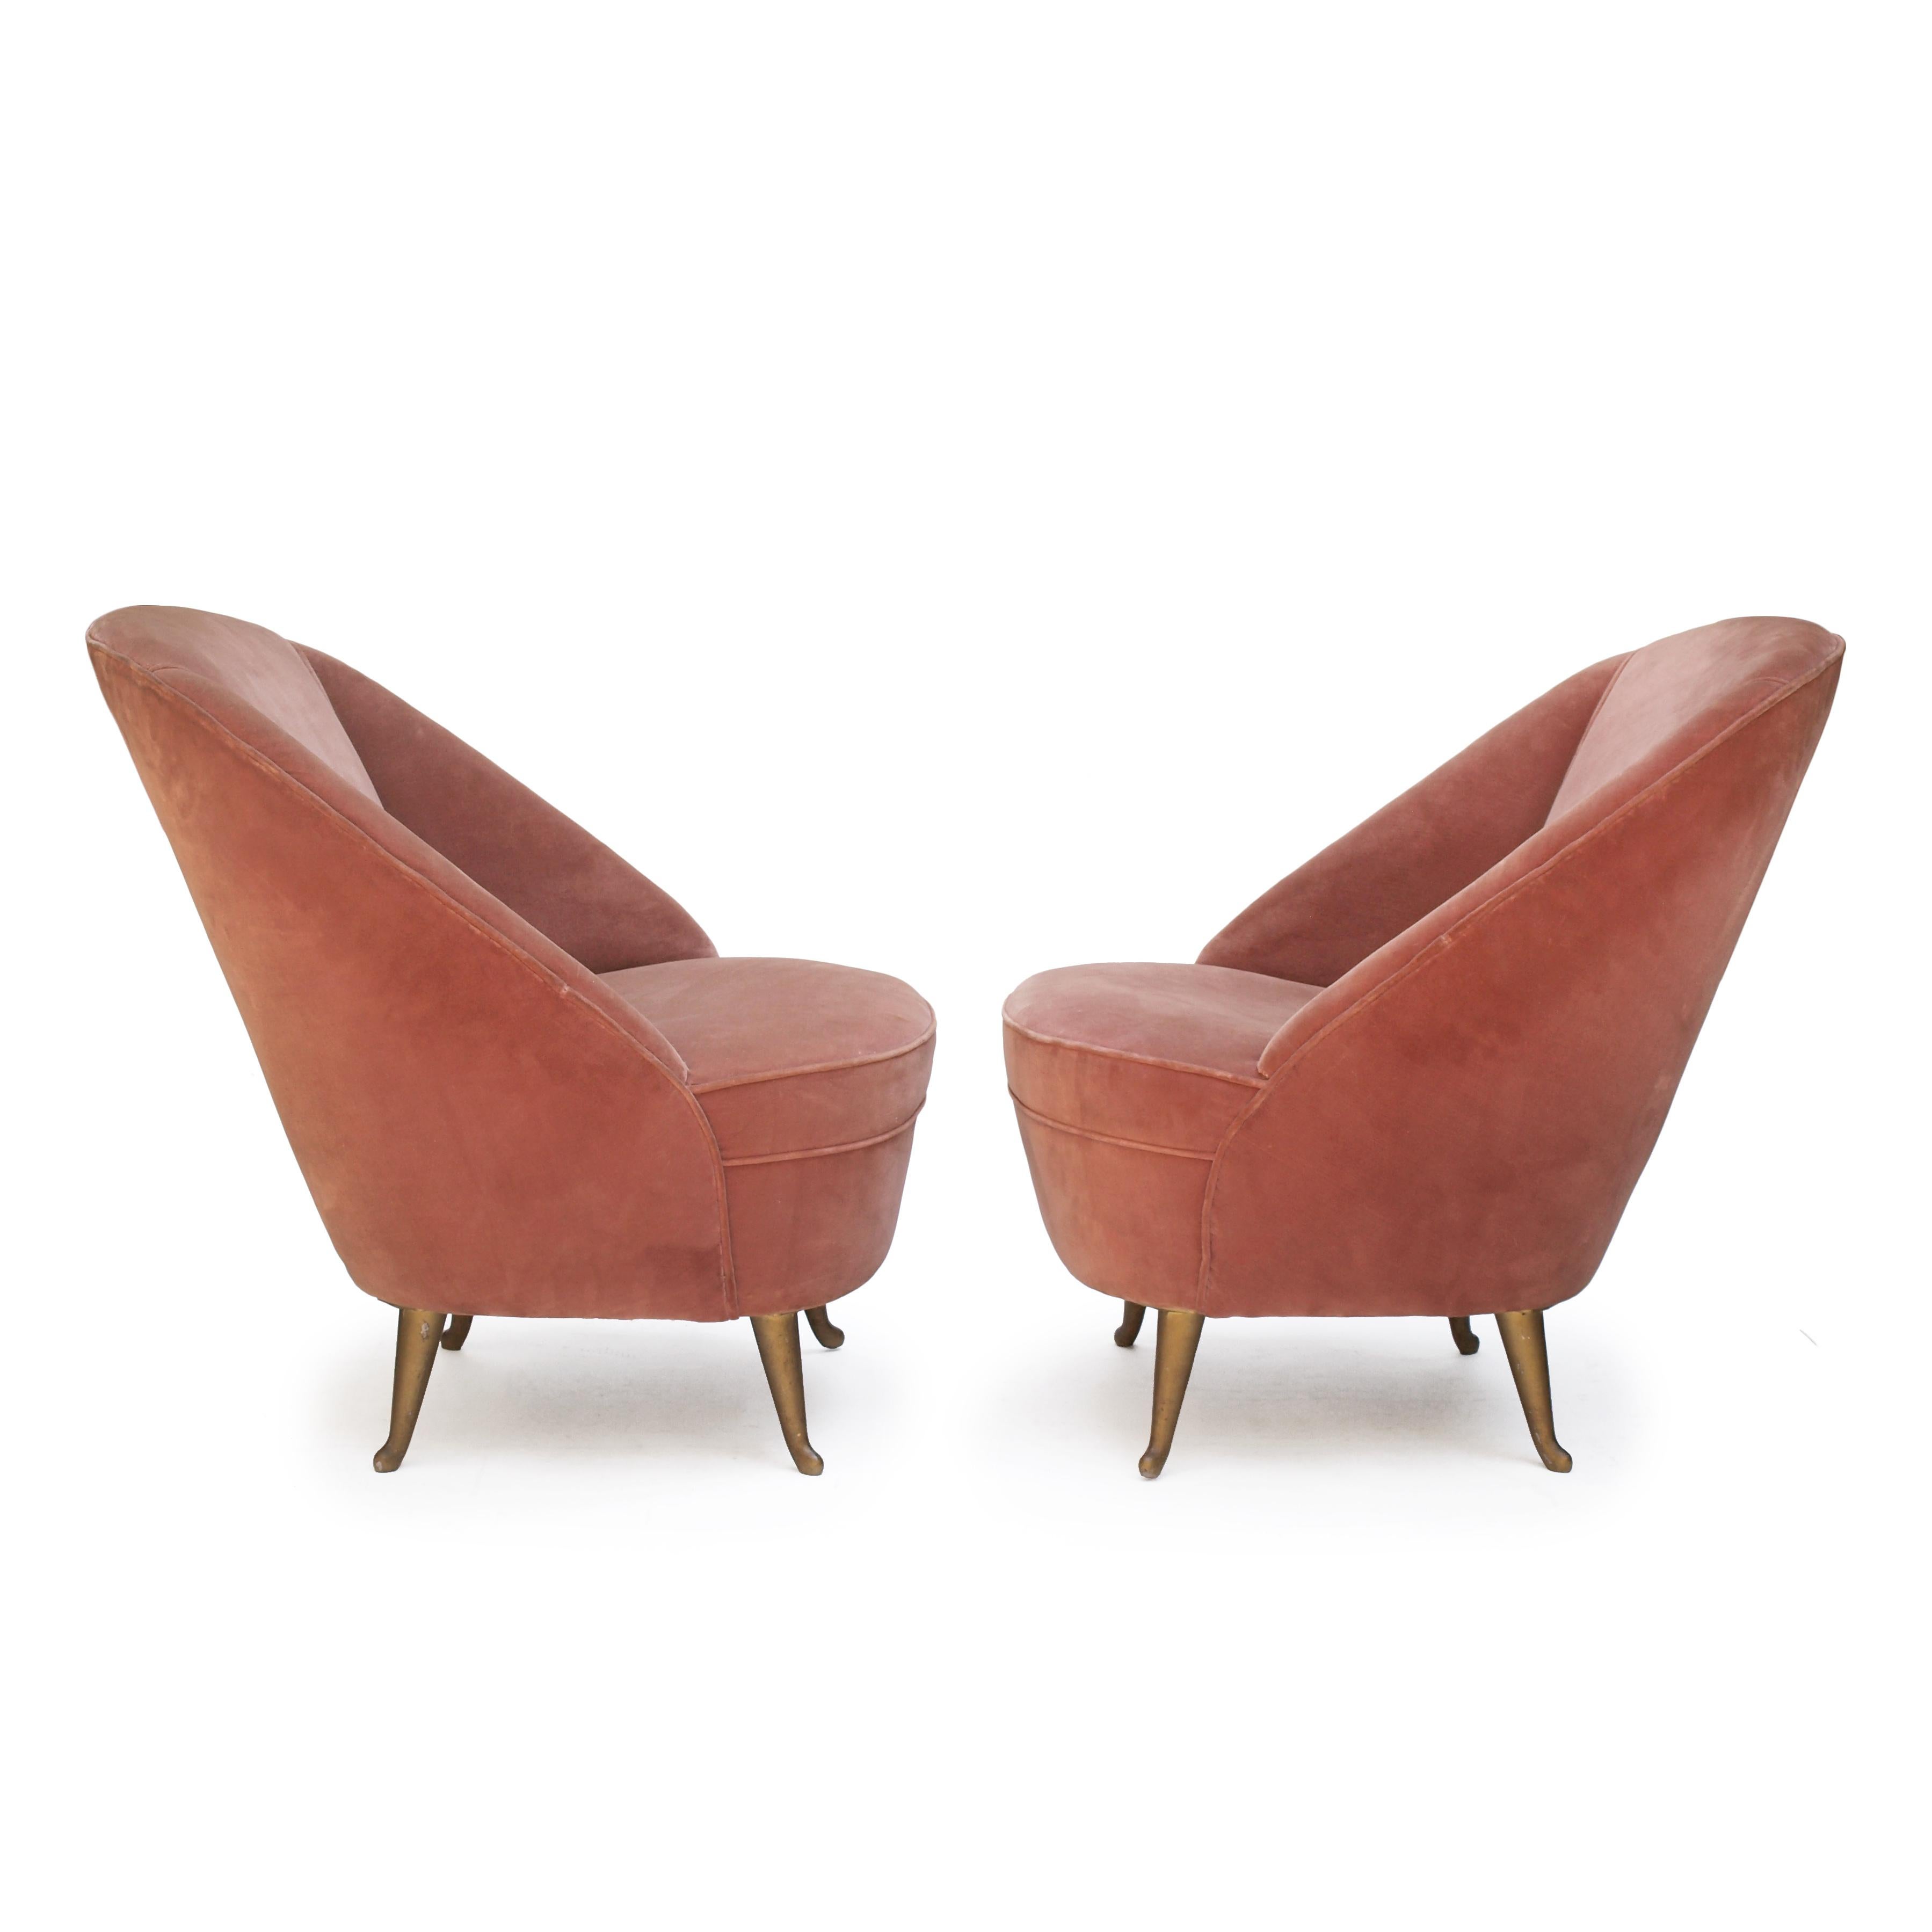 Mid-20th Century Pair of Side Chairs for I.S.A Bergamo, 1950s